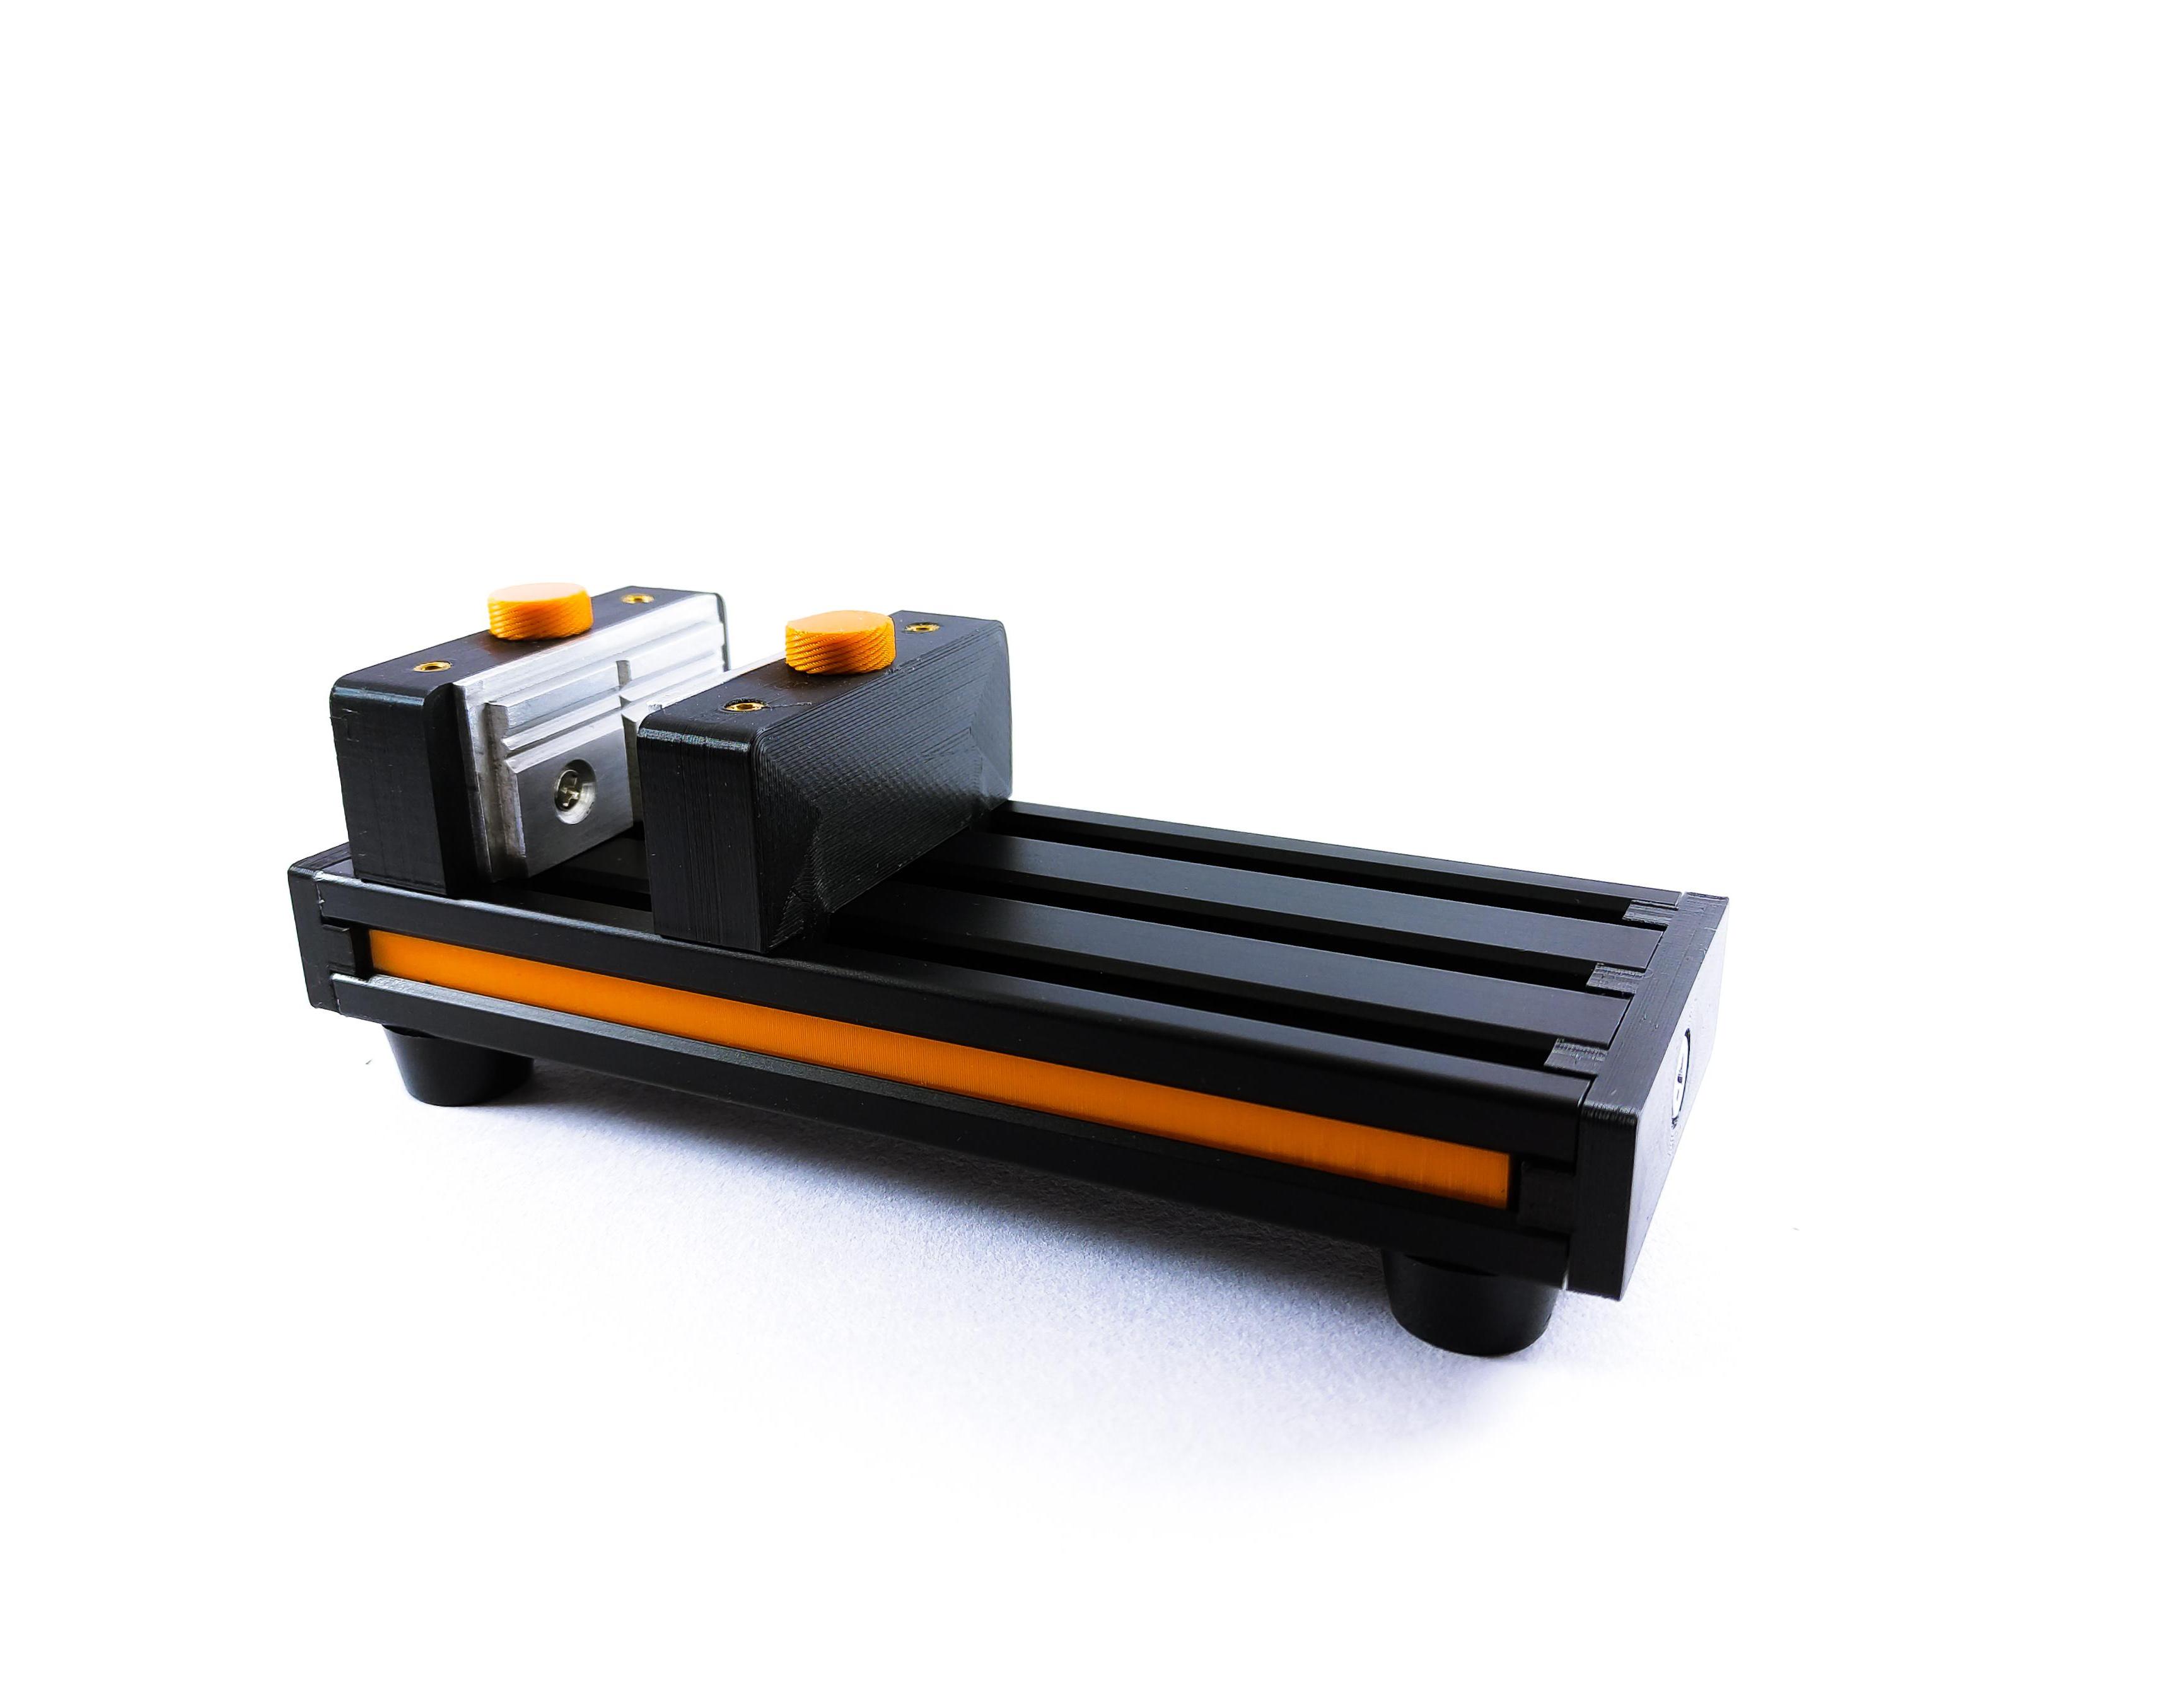 PCB Bench Vise From Aluminum Extrusion Profile